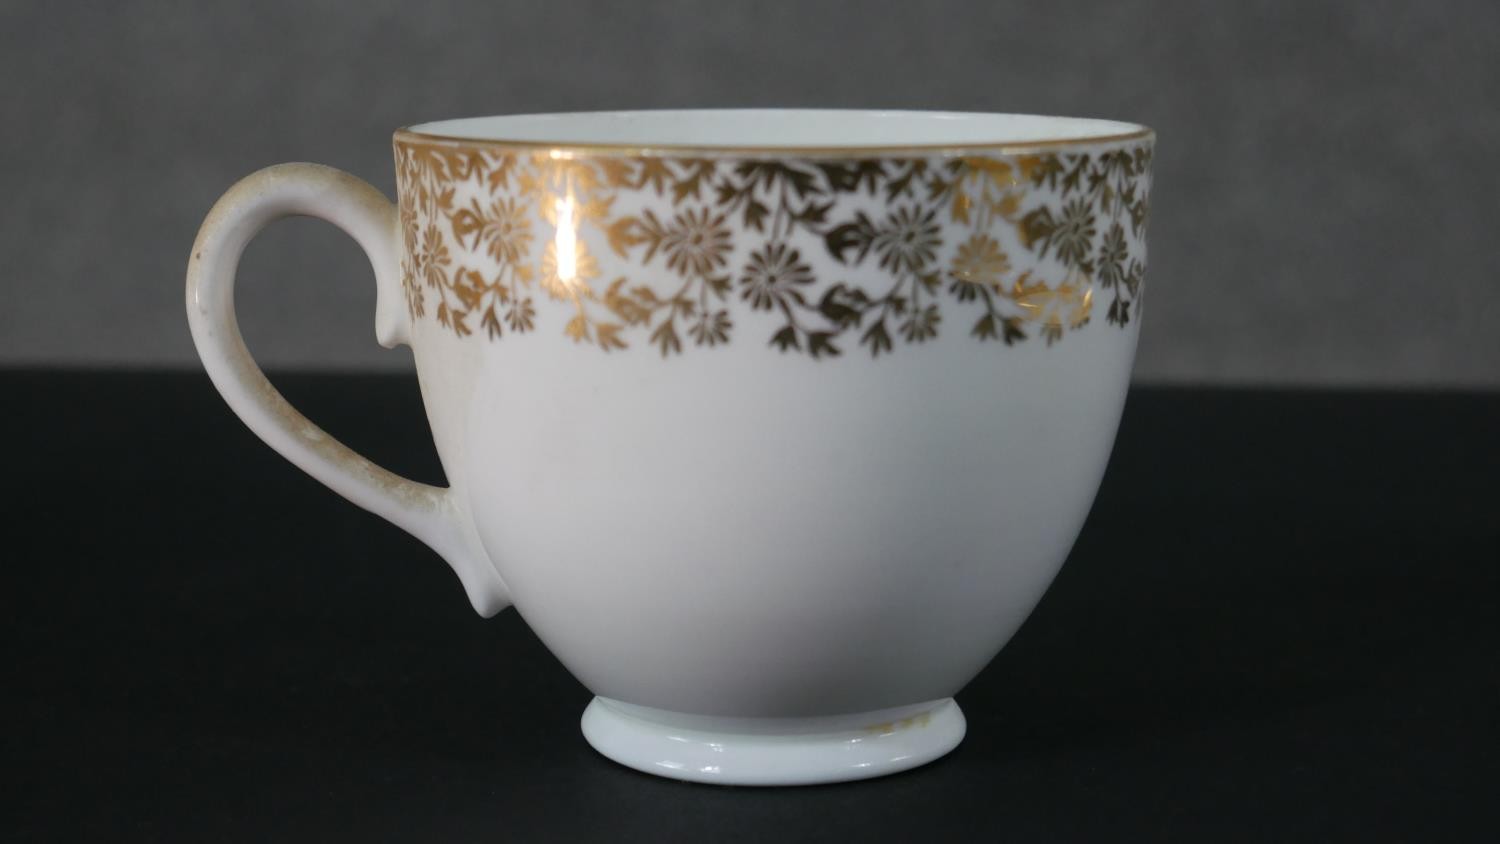 An Adderley gilded floral design fine bone china part six person tea set. Six tea cups and - Image 3 of 8